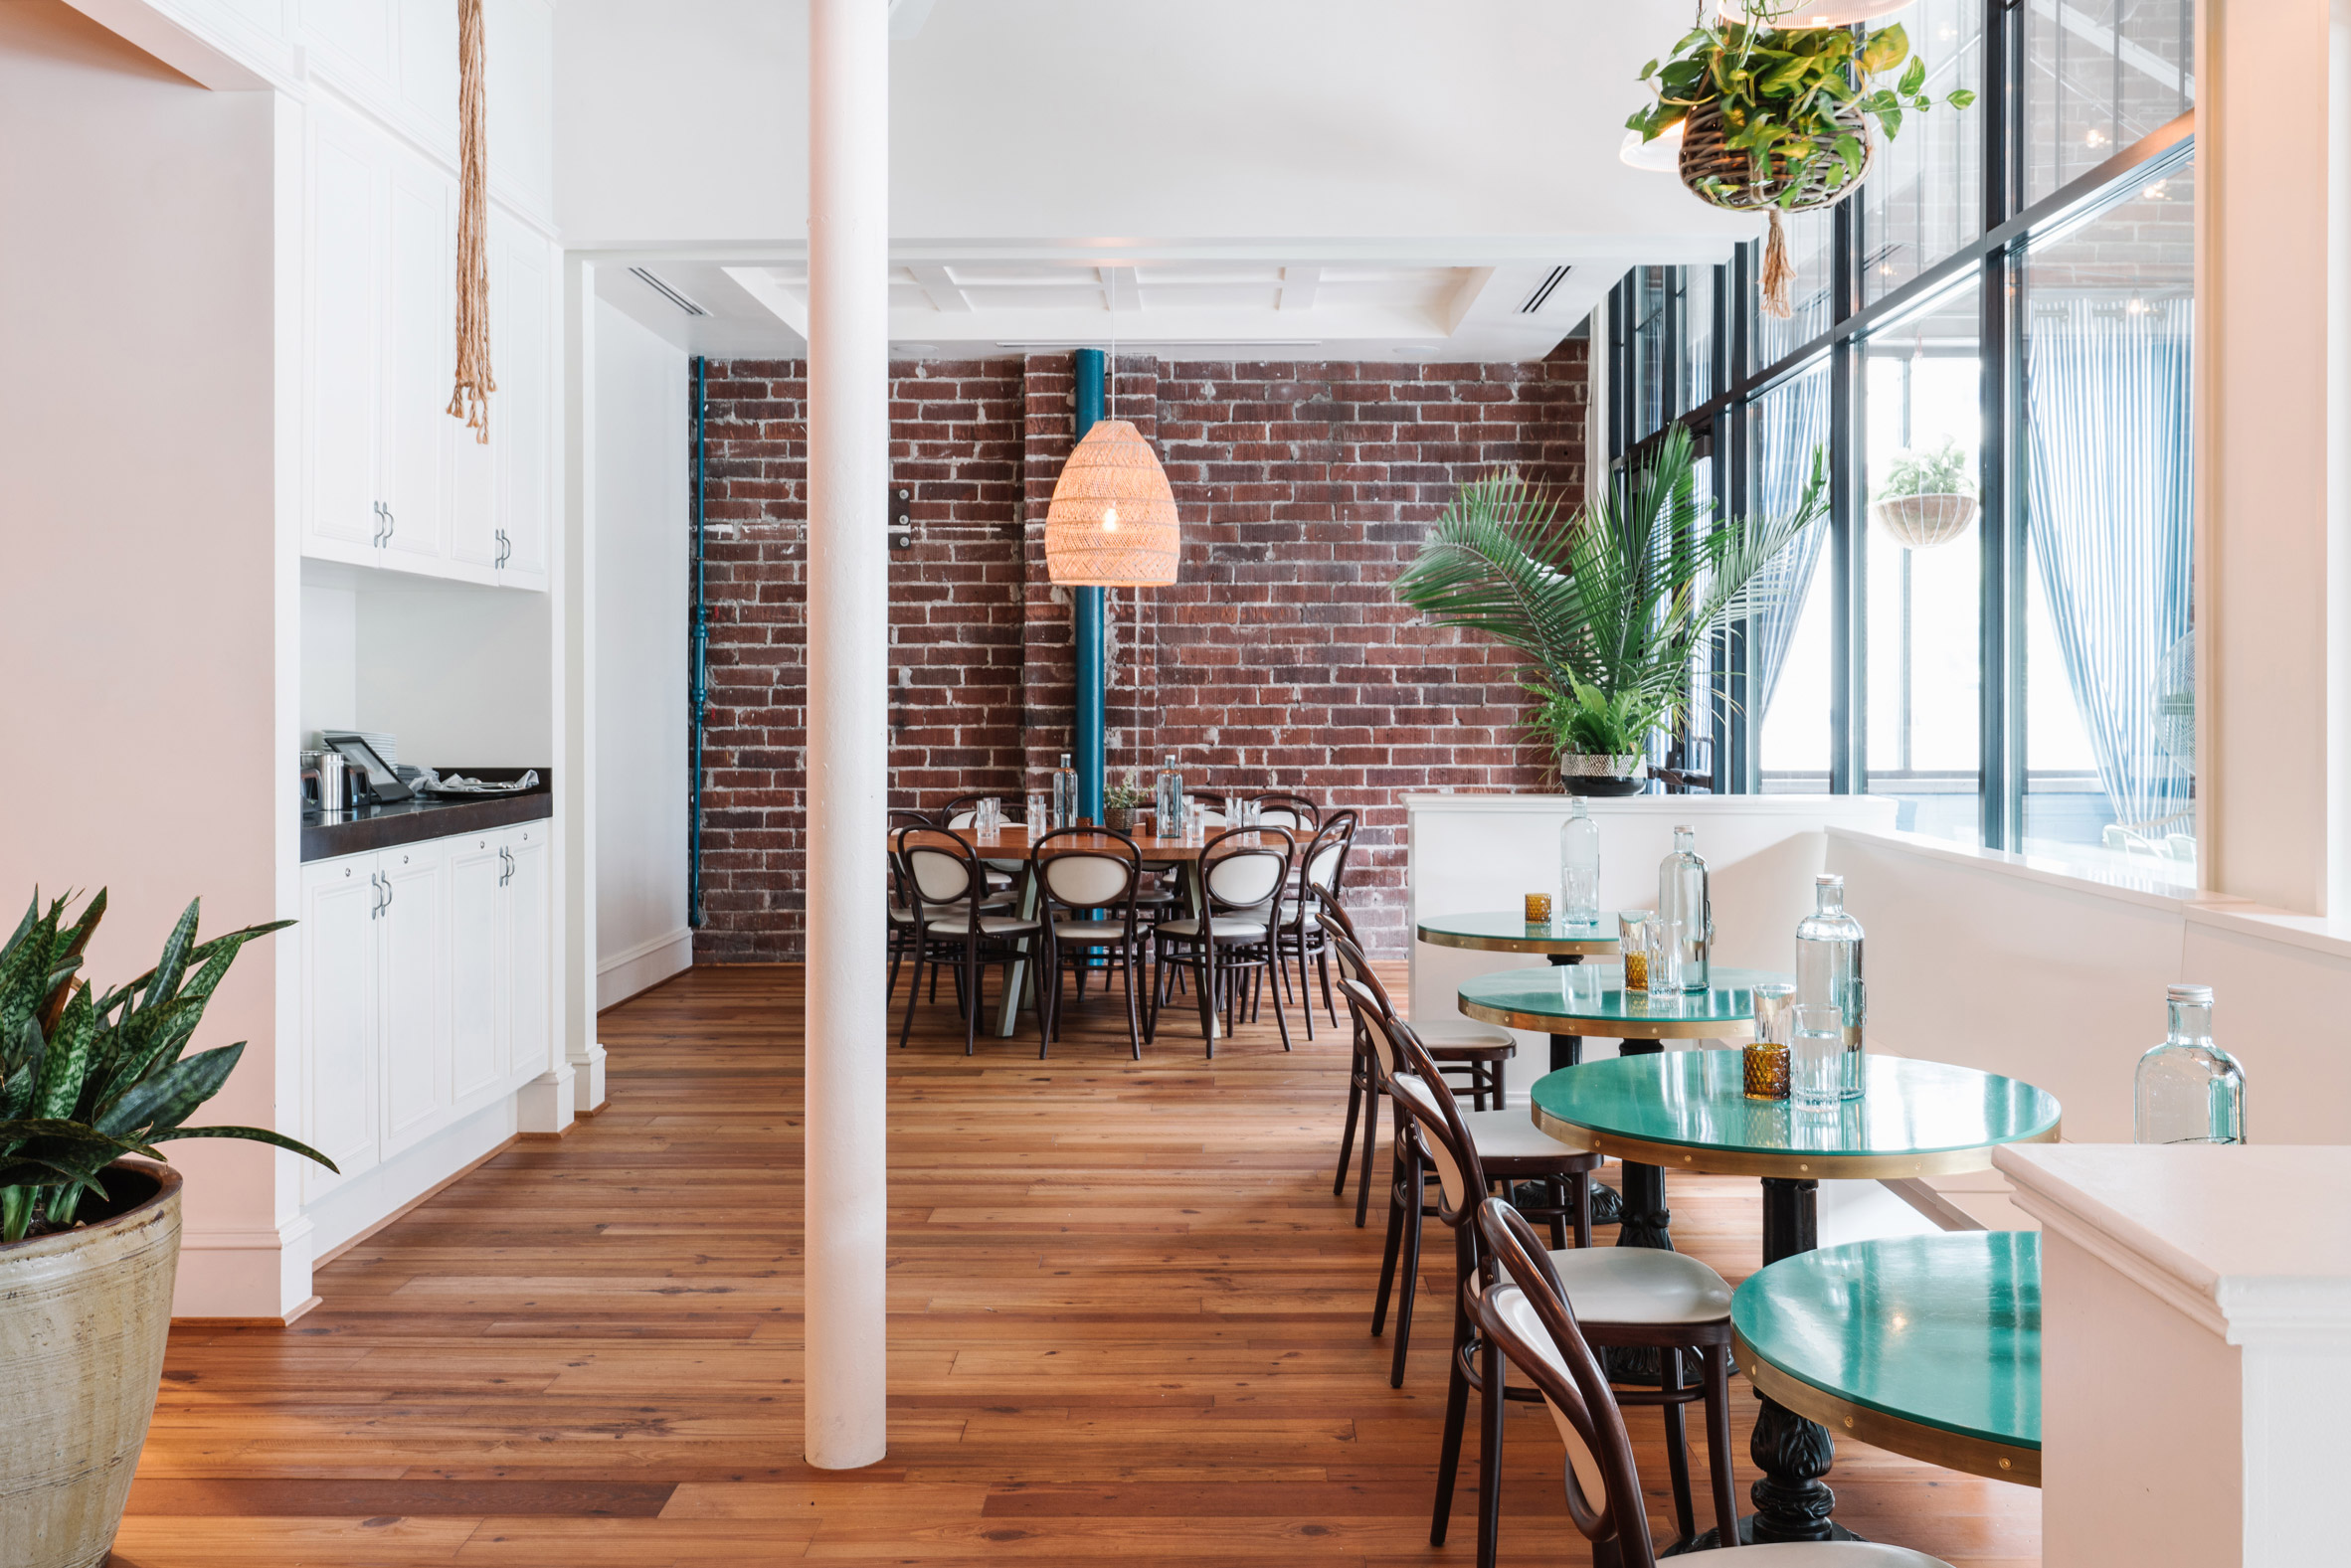 Watchman's Seafood & Spirits by Square Feet Studio